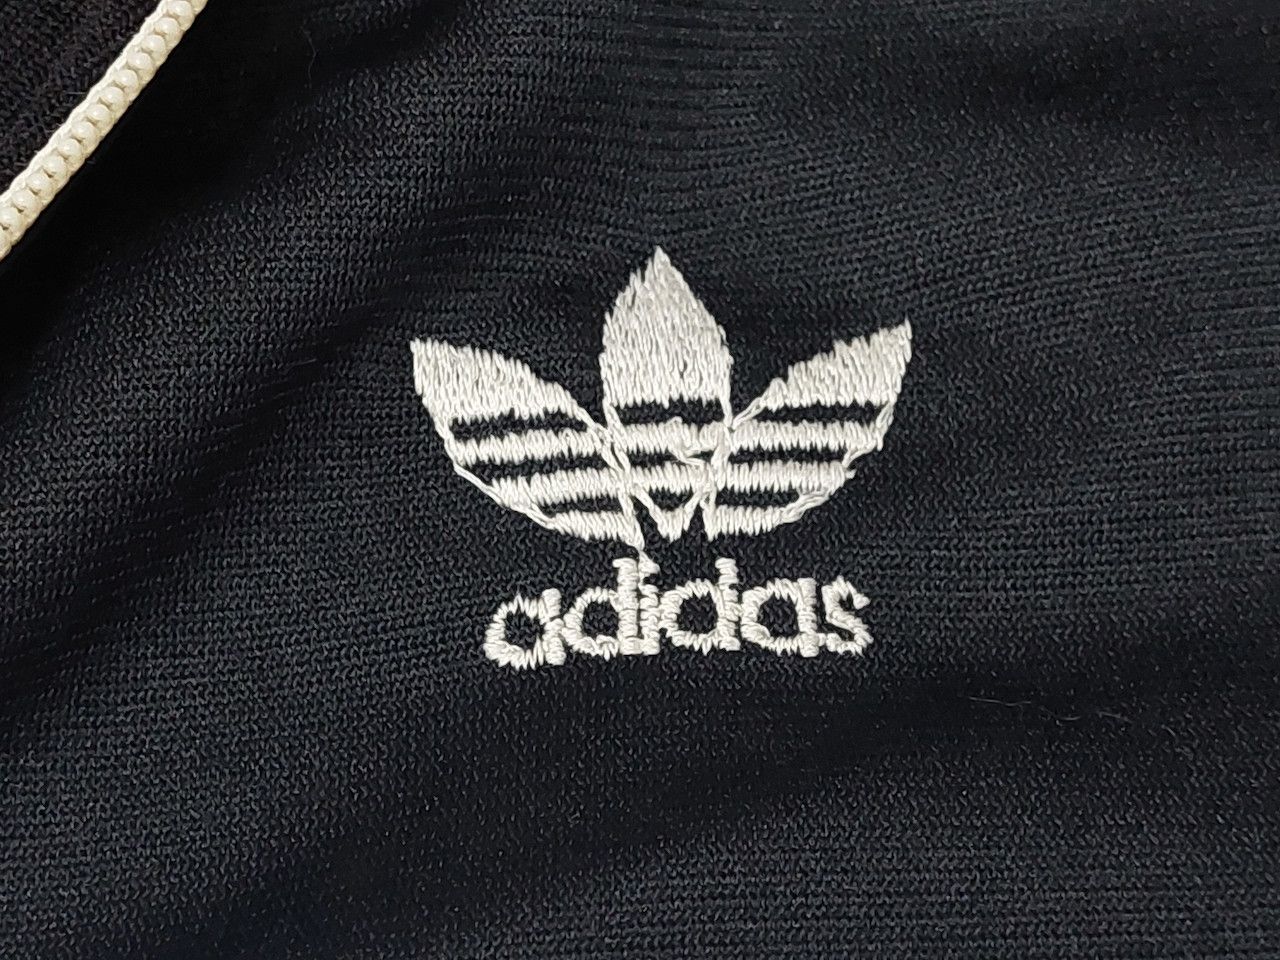 Super Vintage Adidas Tracktop Sweater Collector Items - 8